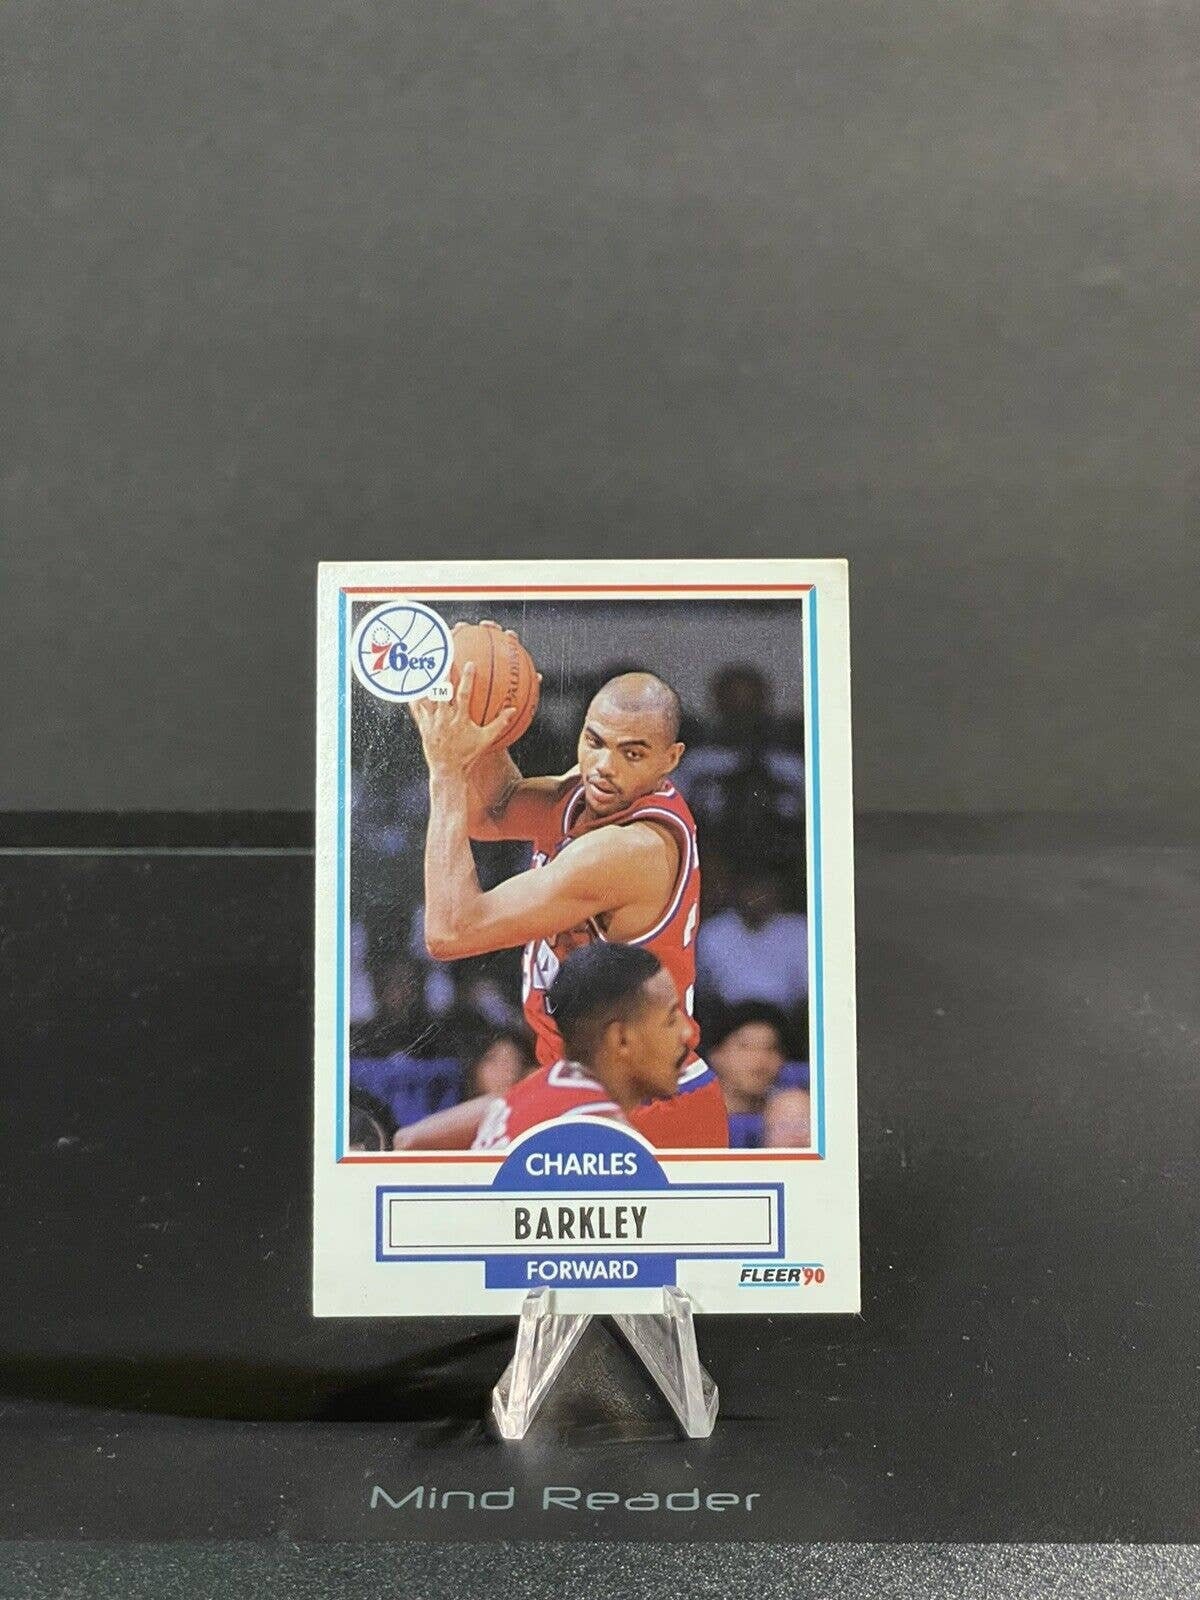 Top Charles Barkley Cards, Rookie Cards, Autographs, Inserts, Valuable